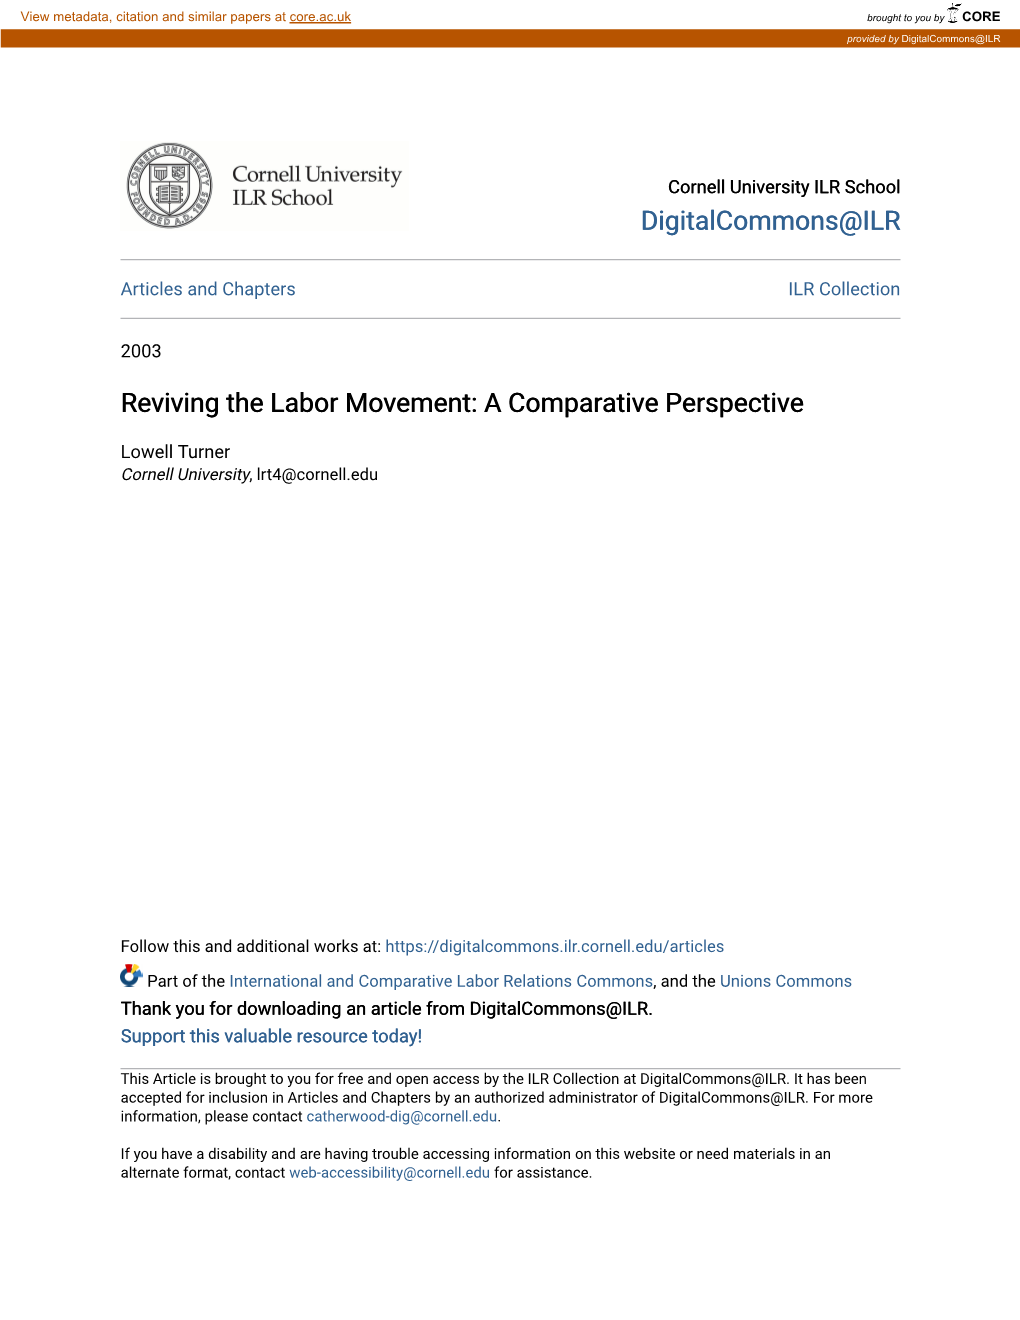 Reviving the Labor Movement: a Comparative Perspective